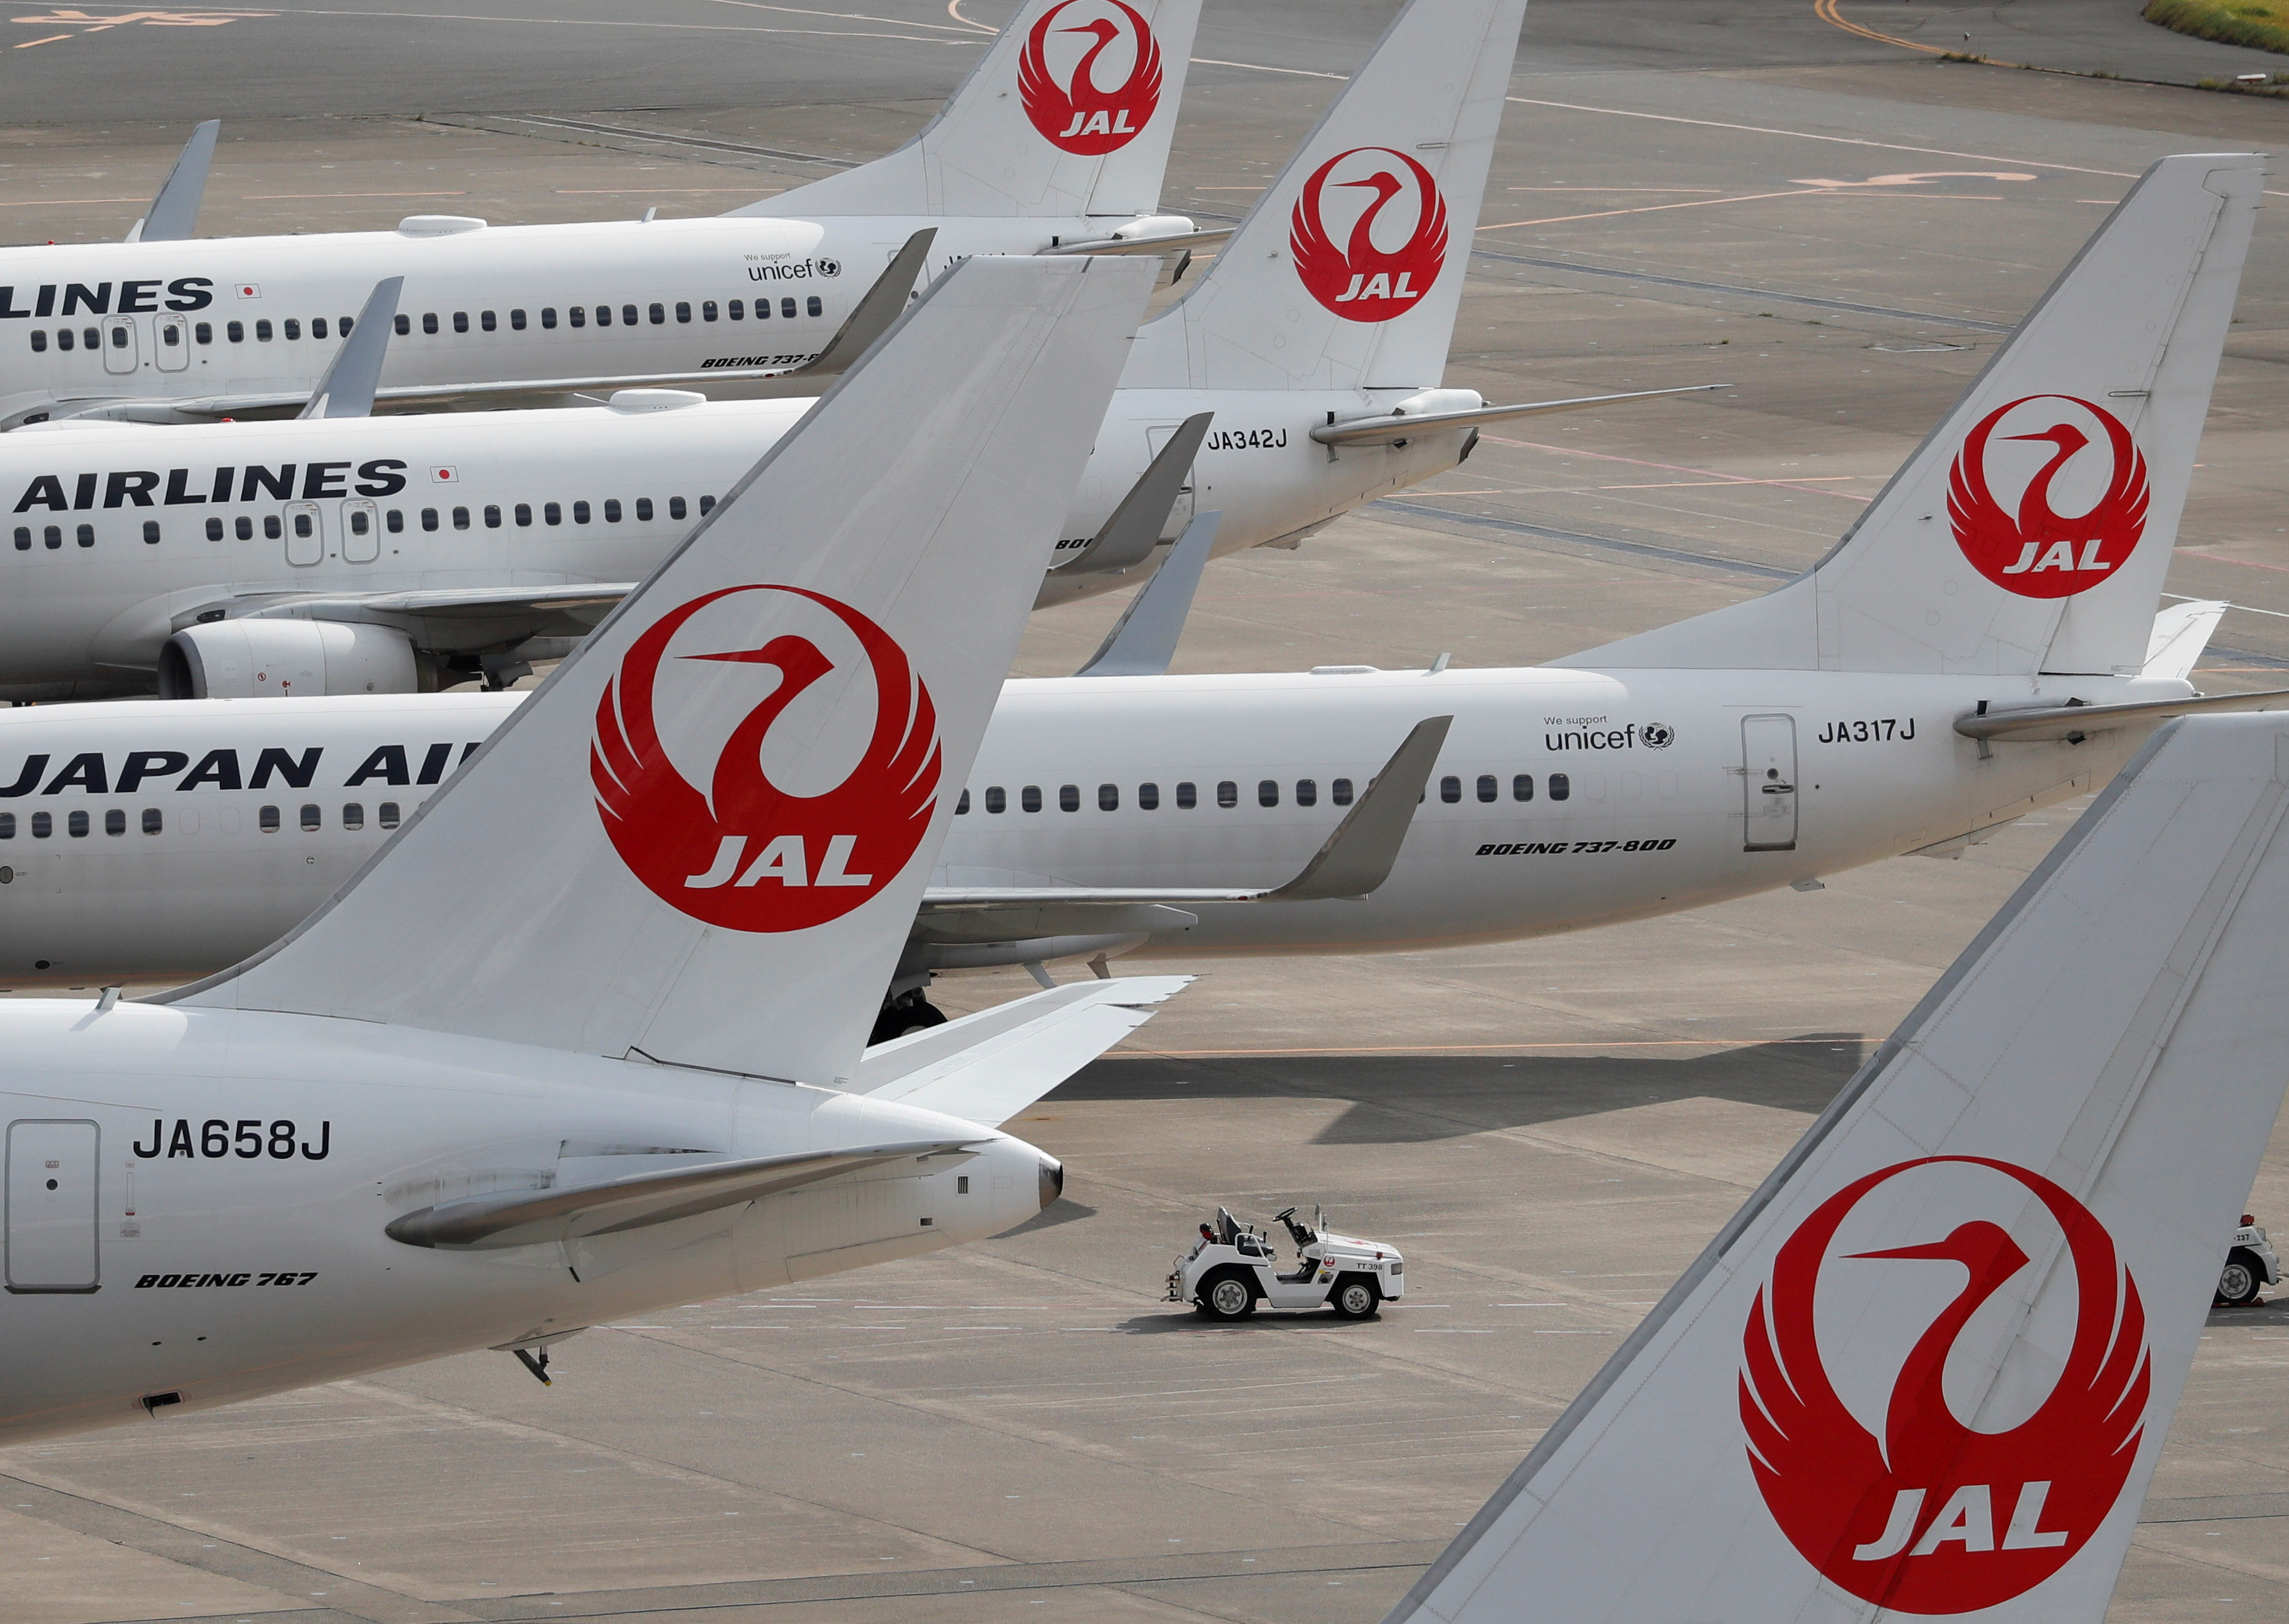 Japan Airlines Plans To Raise $2.7 Bln To Bolster Finances | Reuters